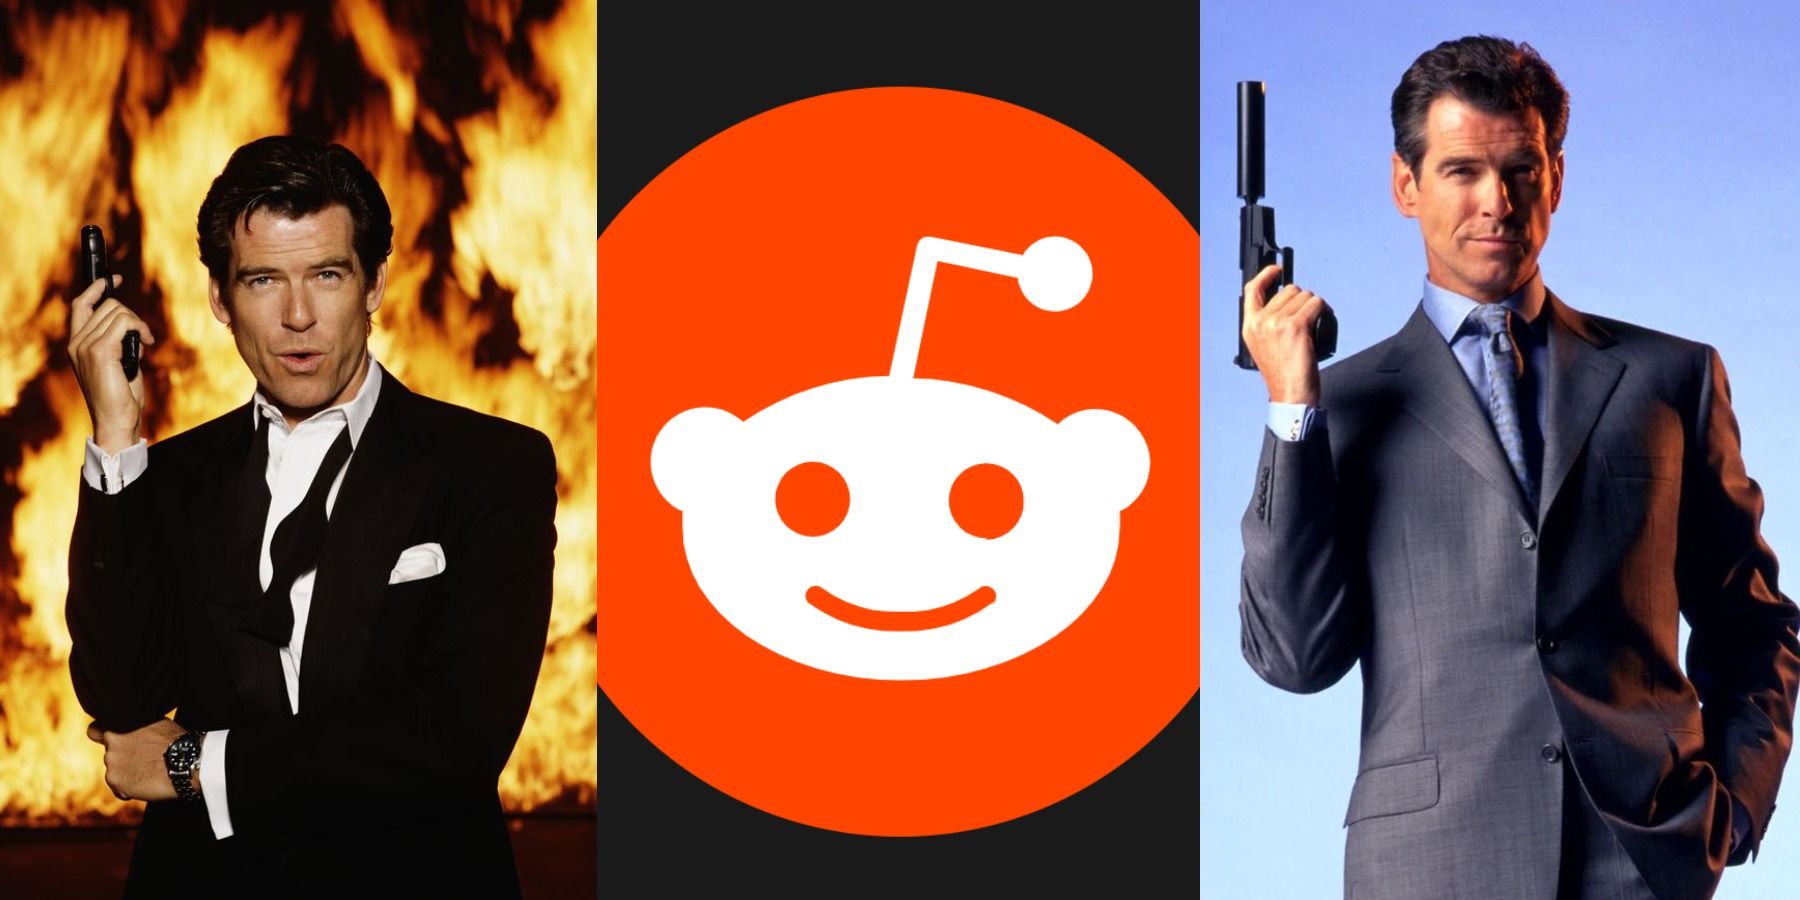 10 Reasons Why Pierce Brosnan Is The Most Underrated James Bond According To Reddit